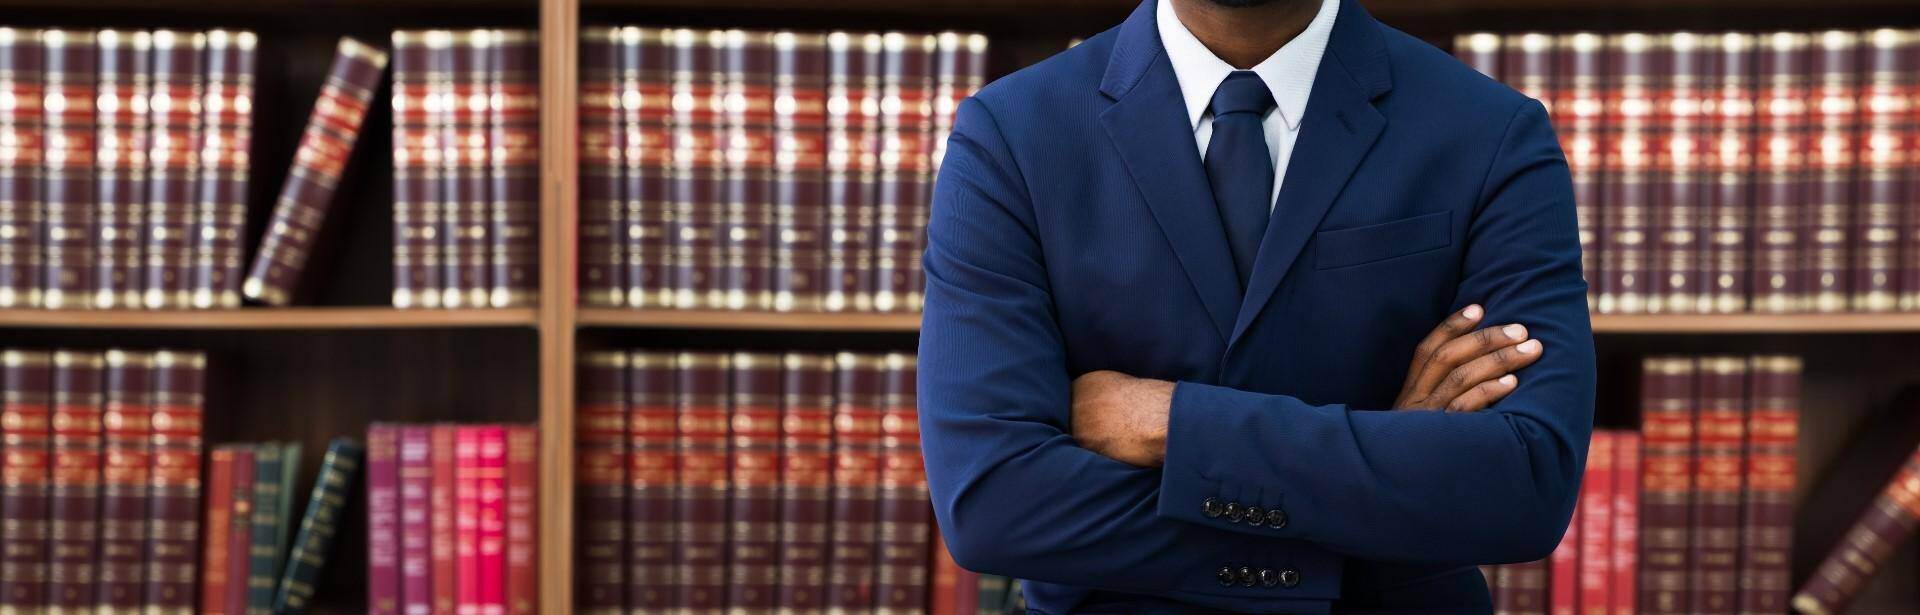 A black lawyer standing in front of a bookshelf of law book in South Fulton, Georgia